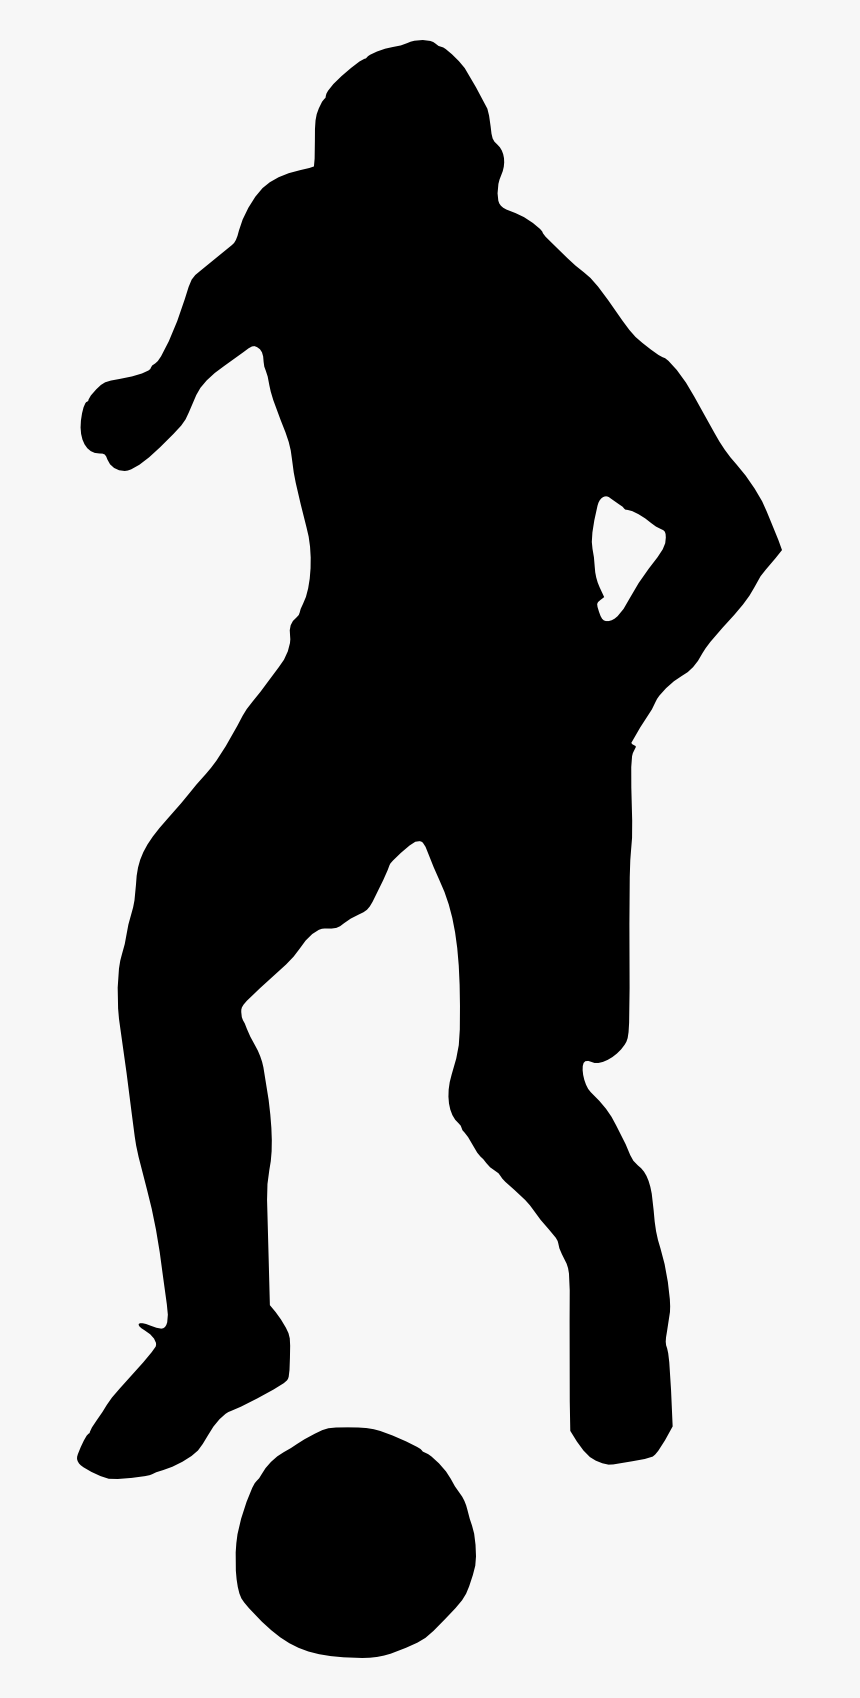 Football Player Silhouette - Football Player Silhouette Png, Transparent Png, Free Download